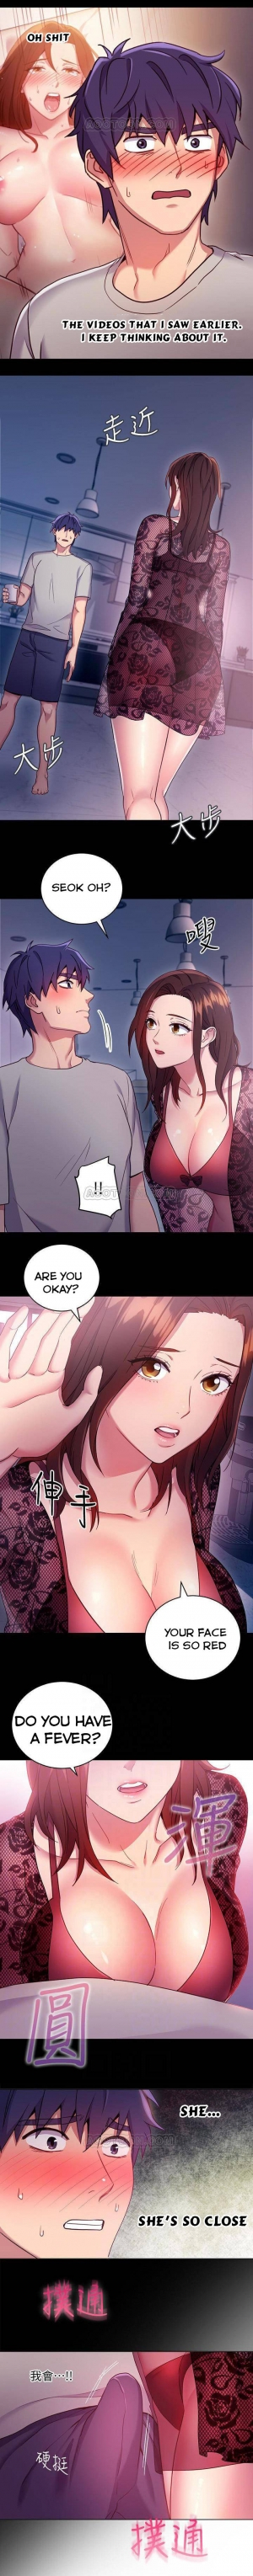  [Neck Pilllow] Stepmother Friends Ch.39/? [English] [Hentai Universe] NEW! 13/10/2020  - Page 98